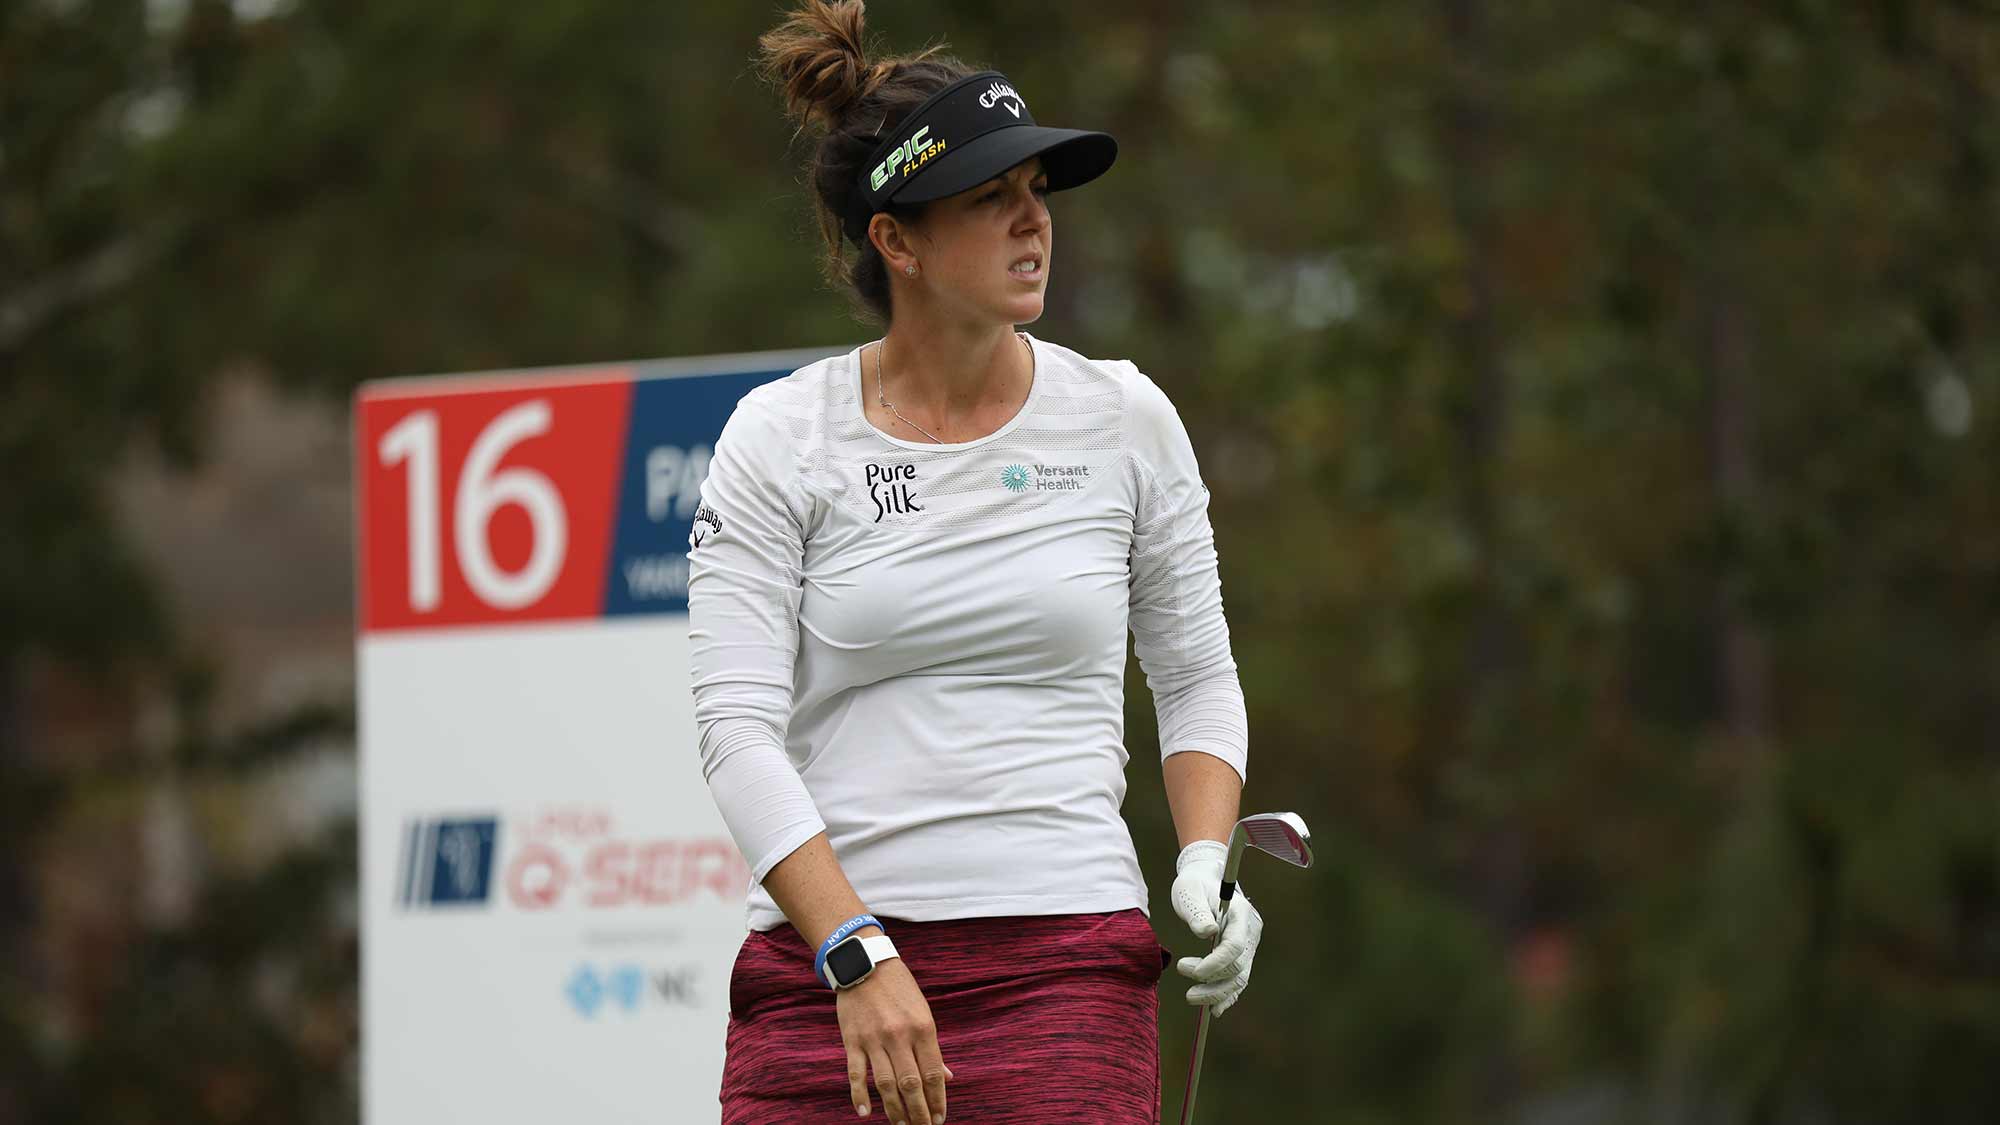 Emma Talley watches her tee shot at the 16th hole at Pinehurst No. 6 during the fourth round of the 2019 LPGA Q-Series at Pinehurst Resort